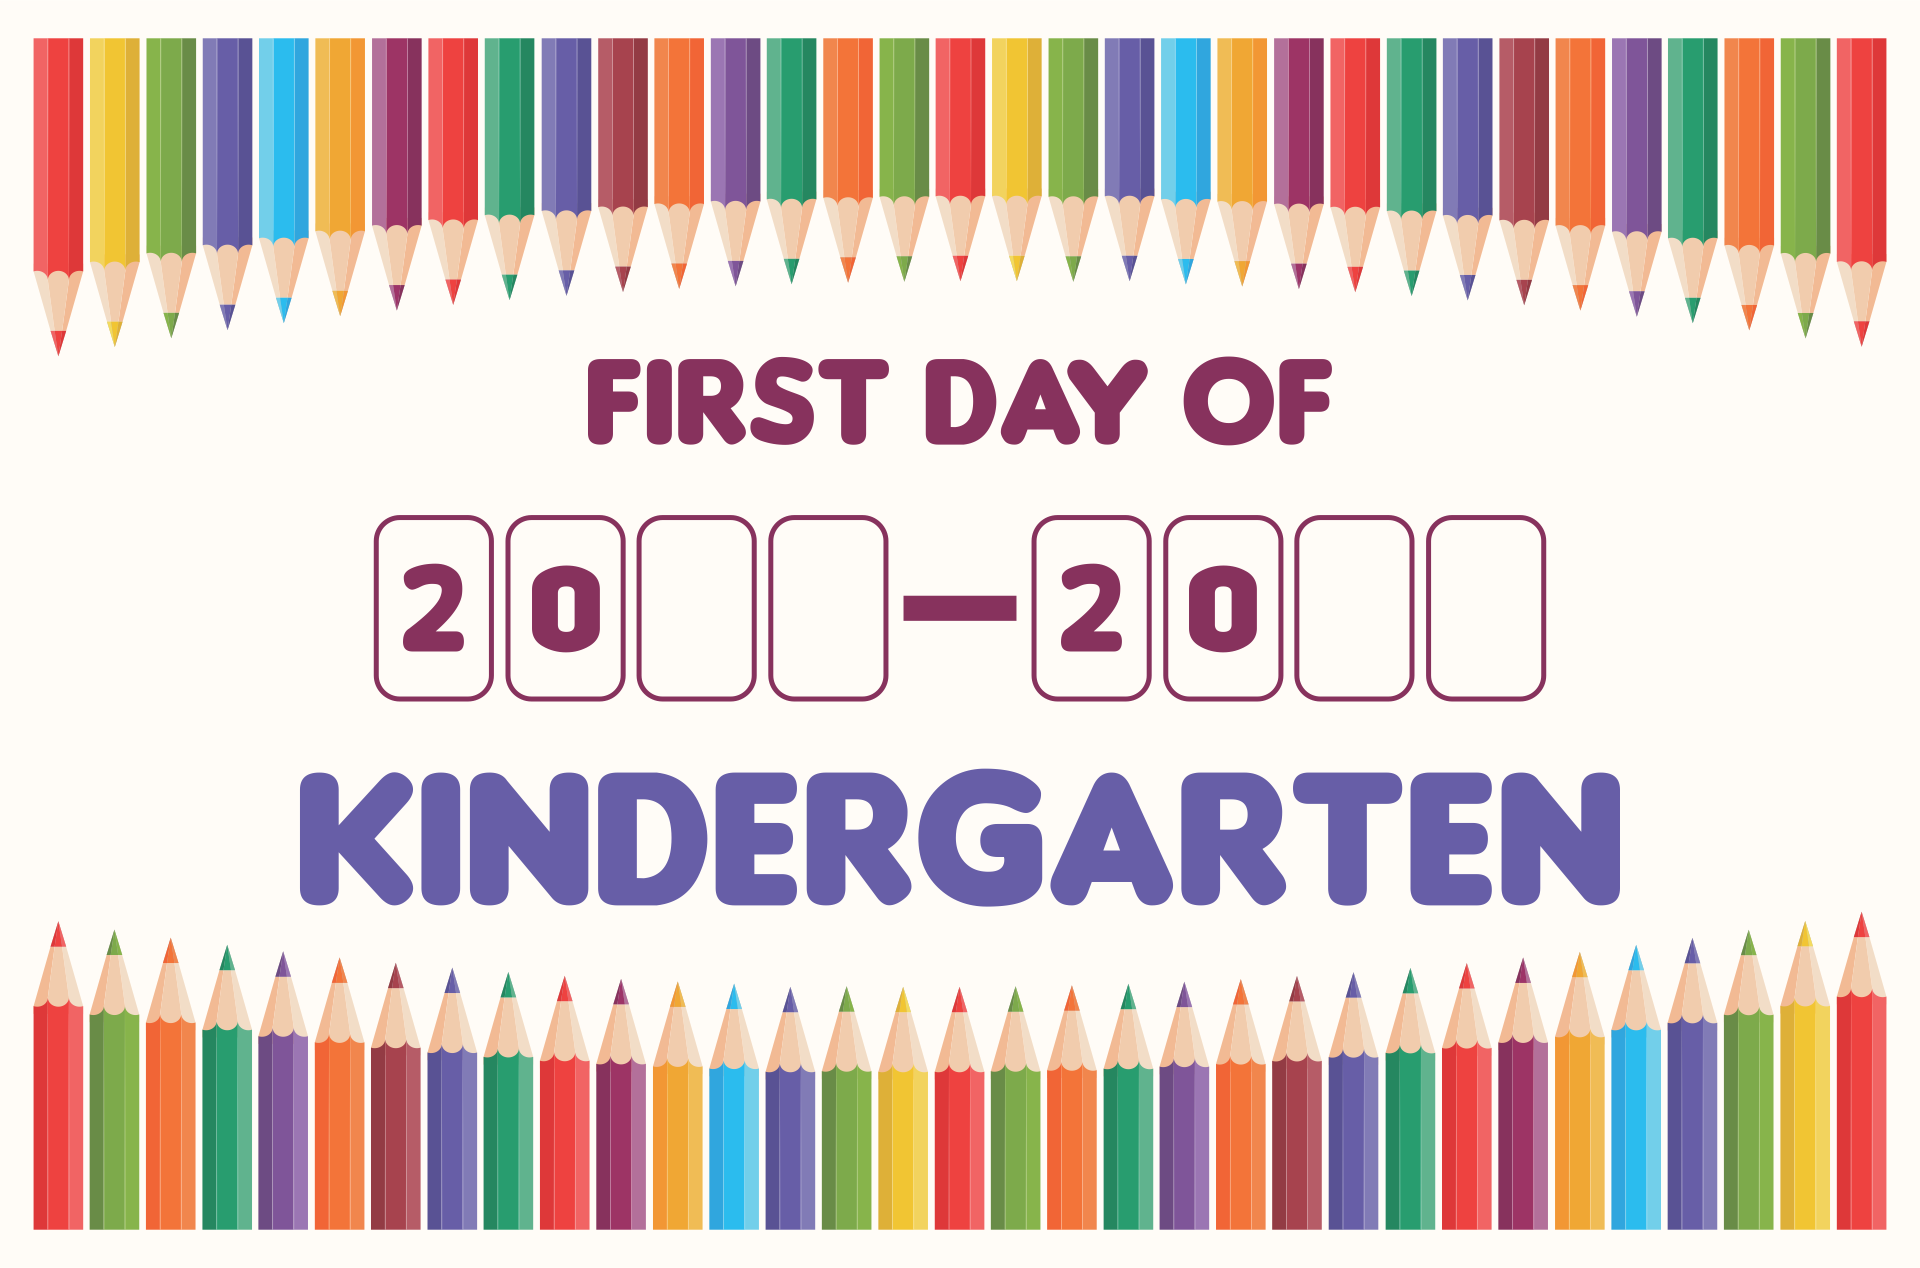 5 Best Images Of 1st Day Of Kindergarten Printable School First Day